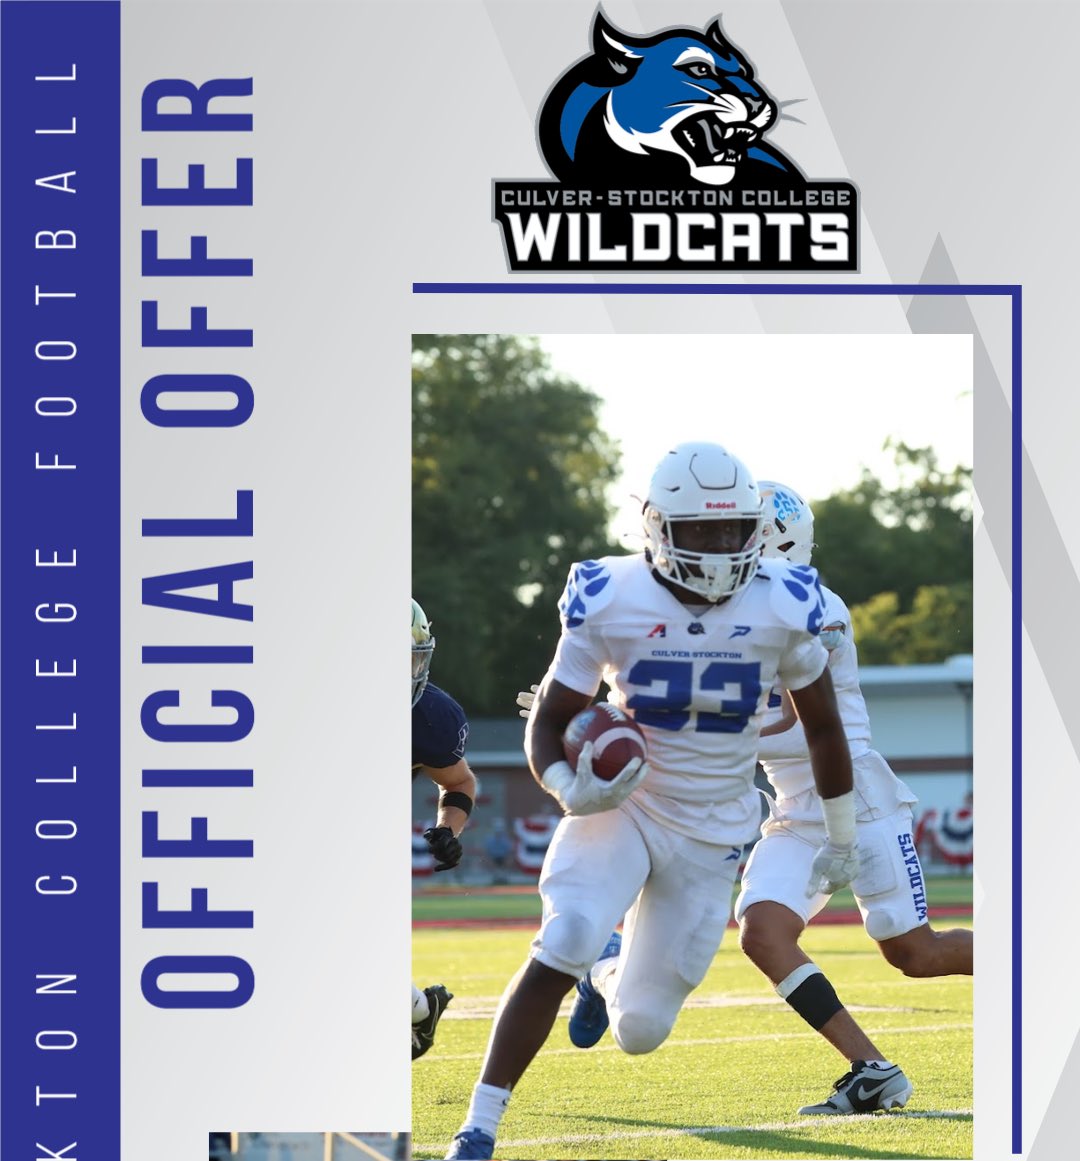 Thank You God! Blessed to receive my first offer from Culver-Stockton College. Go Wildcats! @CoachCutshaw @CoachJGentry